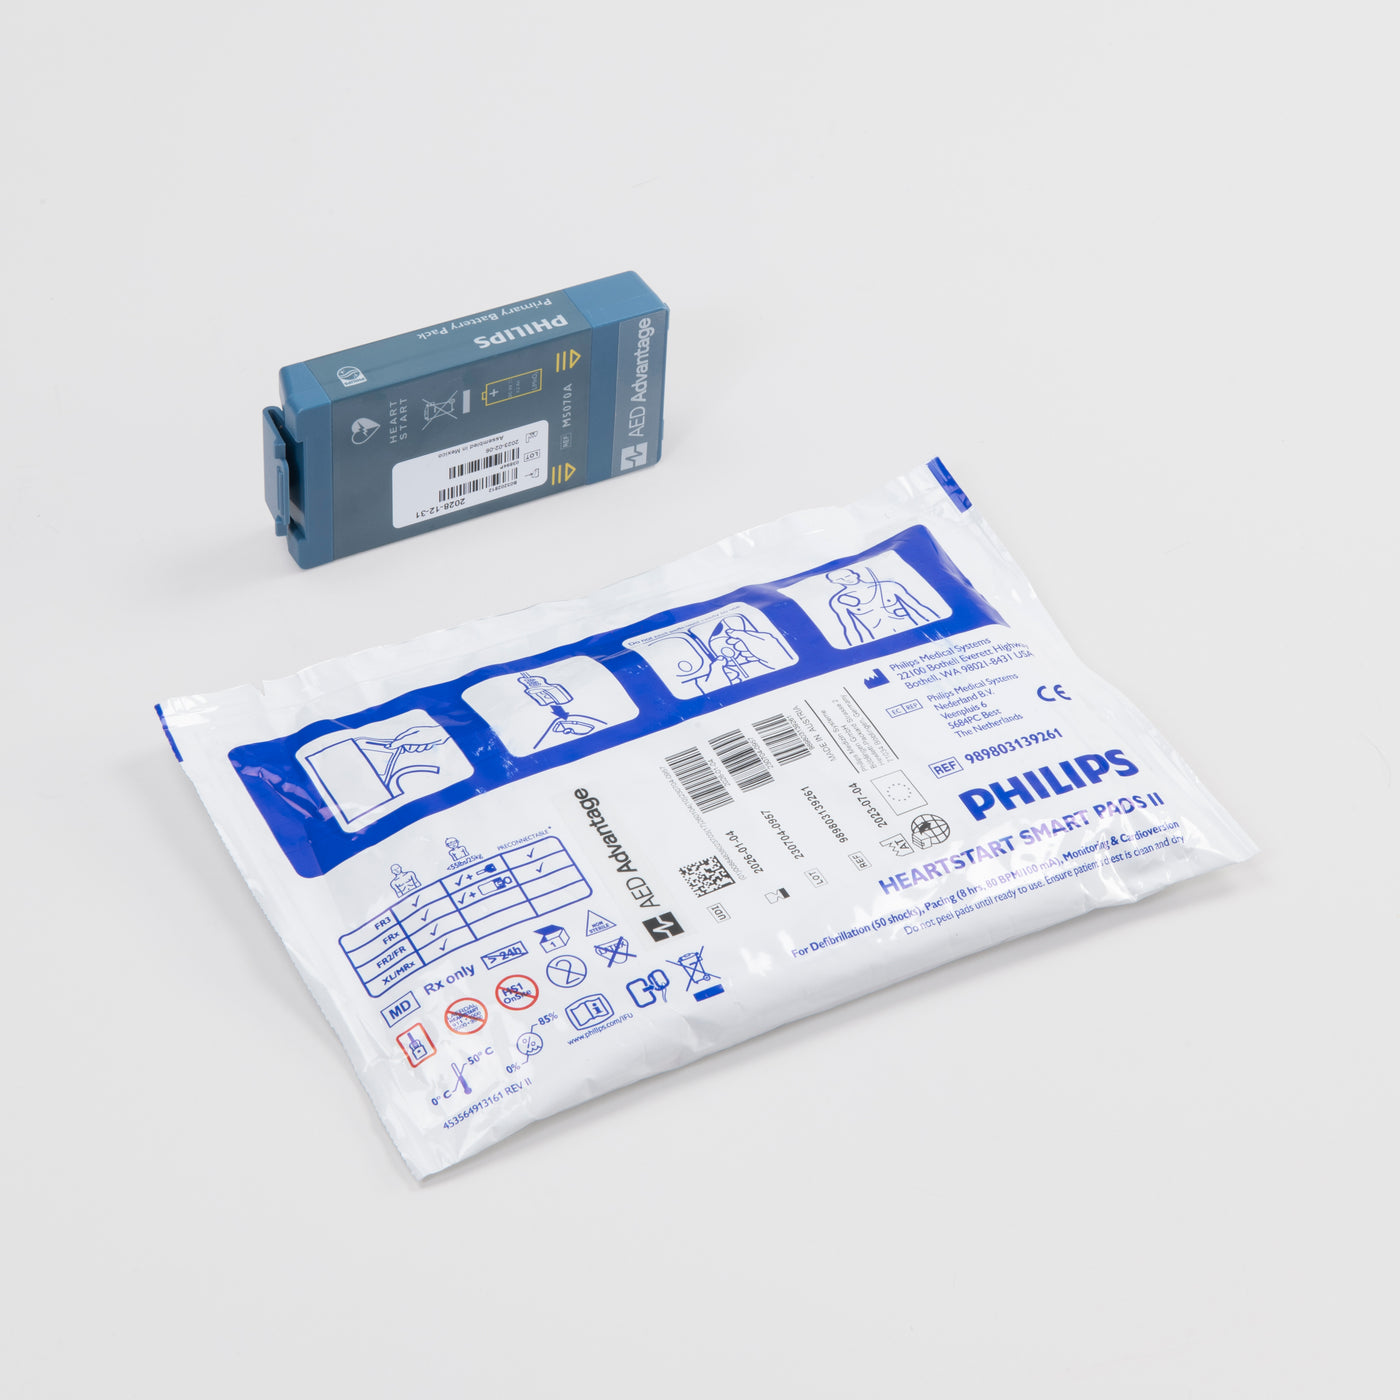 White electrodes package and blue battery pack for the Philips FRx Defibrillator